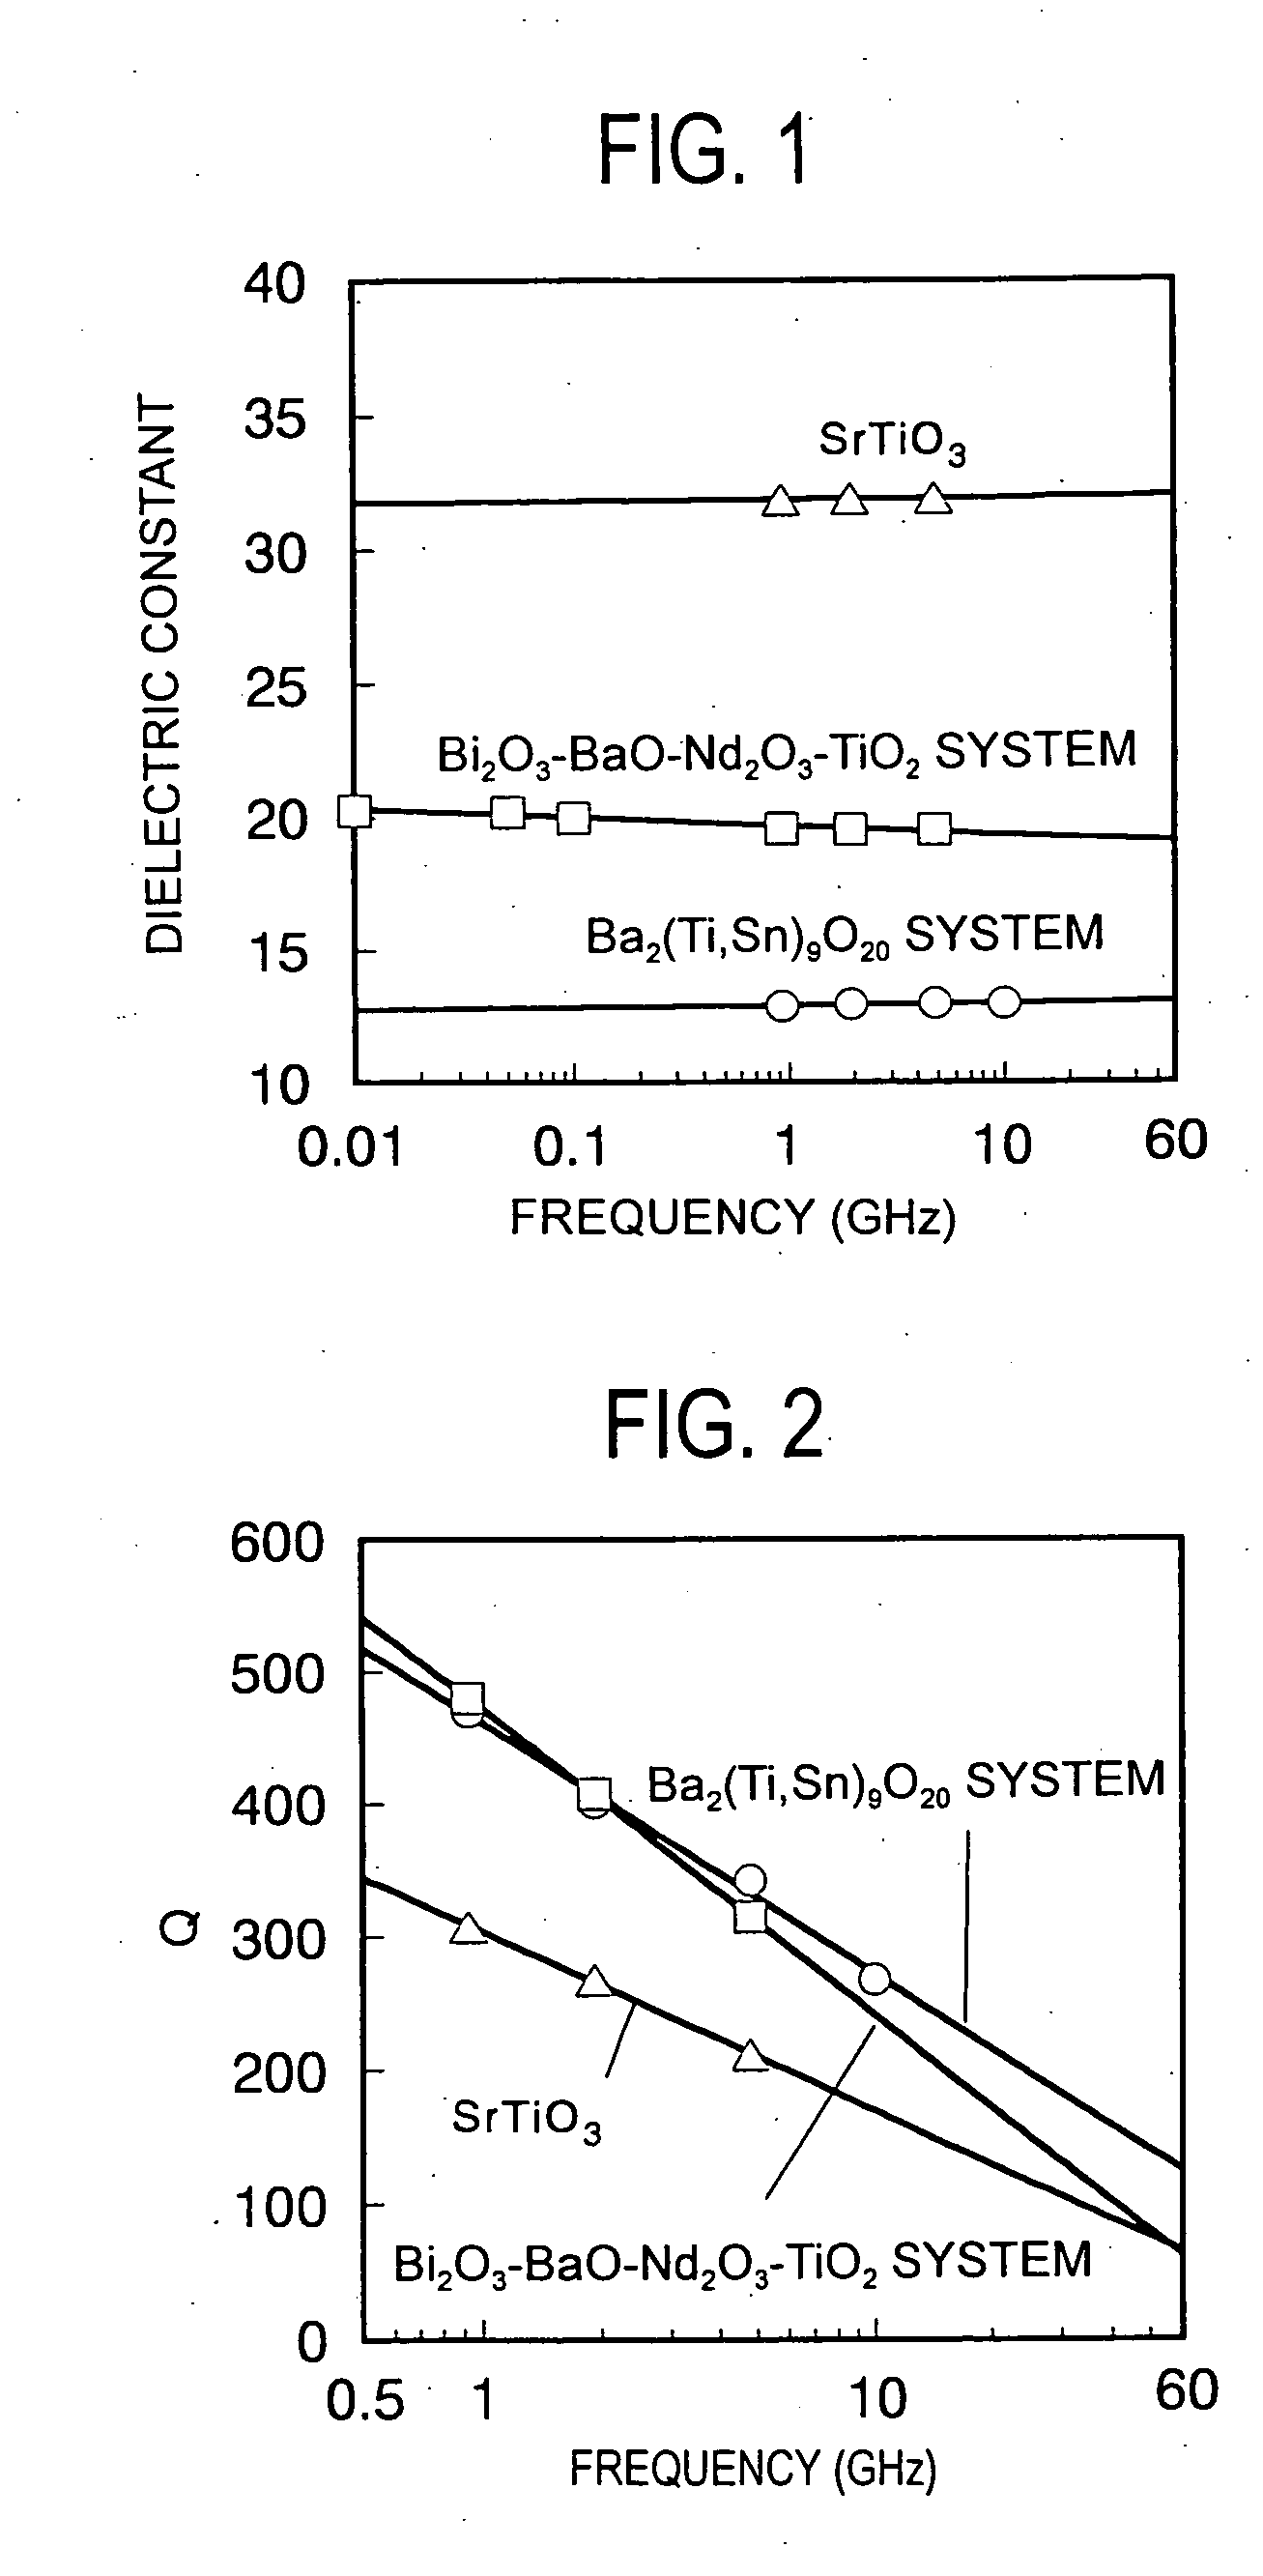 Composite dielectric material, composite dielectric substrate, prepreg, coated metal foil, molded sheet, composite magnetic substrate, substrate, double side metal foil-clad substrate, flame retardant substrate, polyvinylbenzyl ether resin composition, thermosetting polyvinylbenzyl ether resin composition, and method for preparing thermosetting polyvinylbenzyl ether resin composition